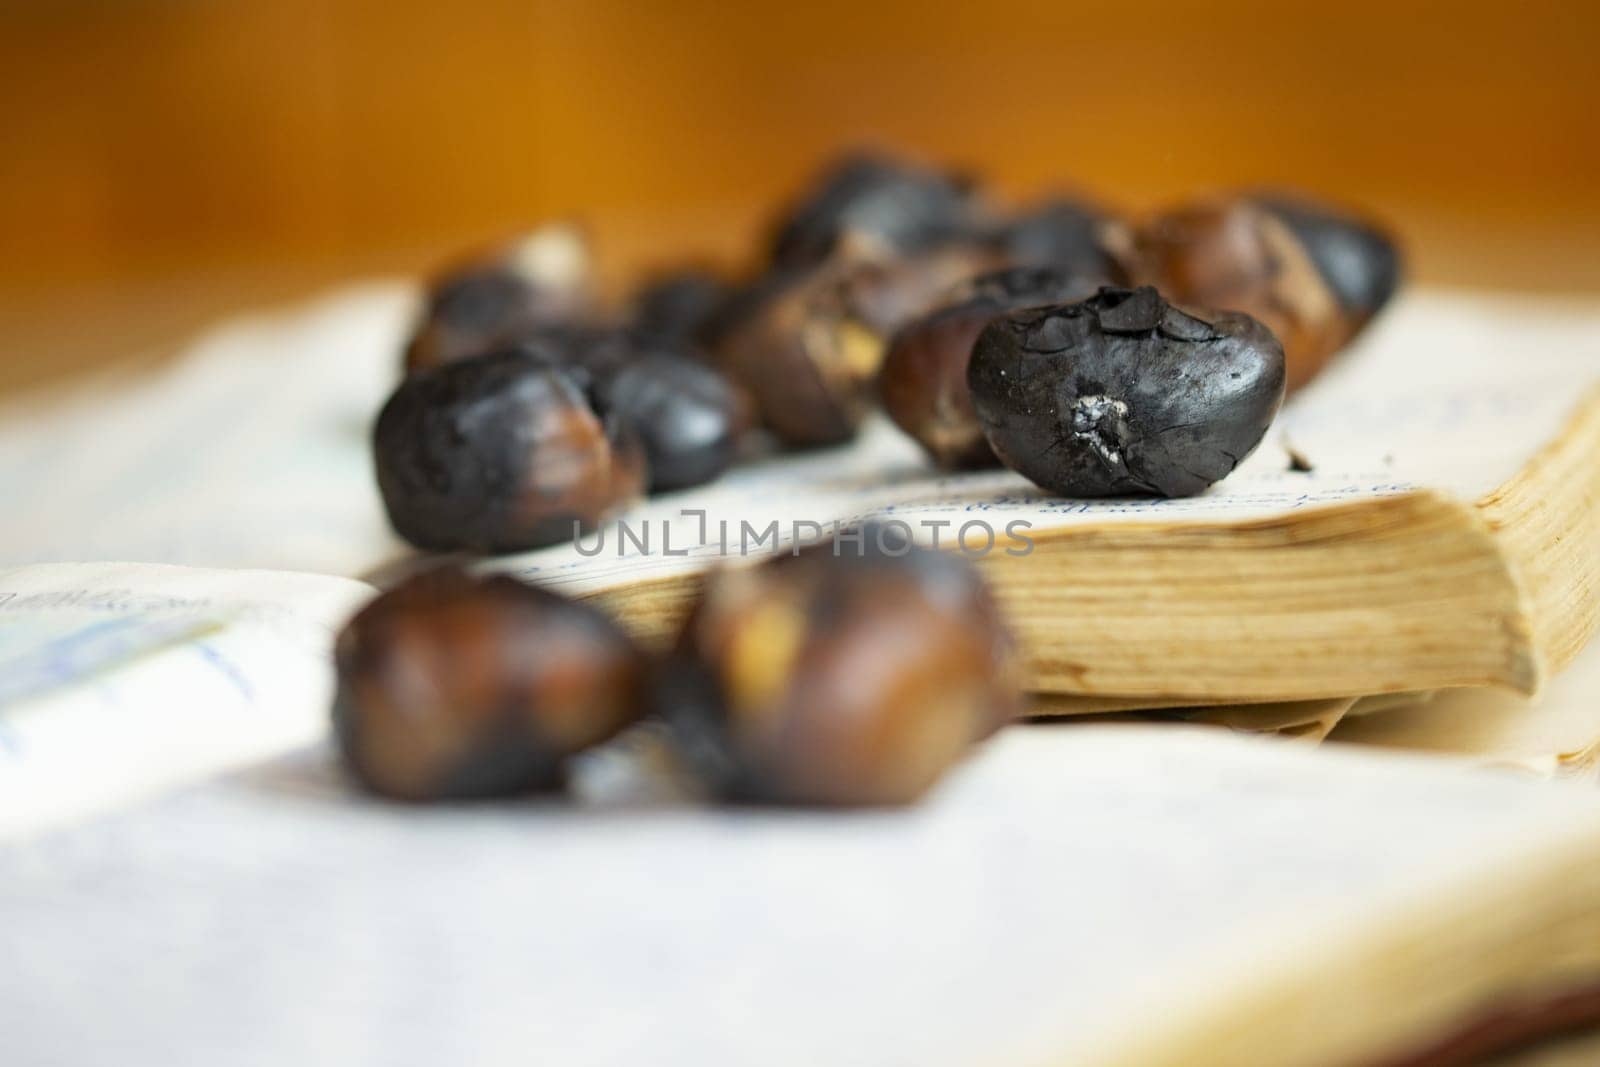 roasted chestnuts resting on a handwritten notebook